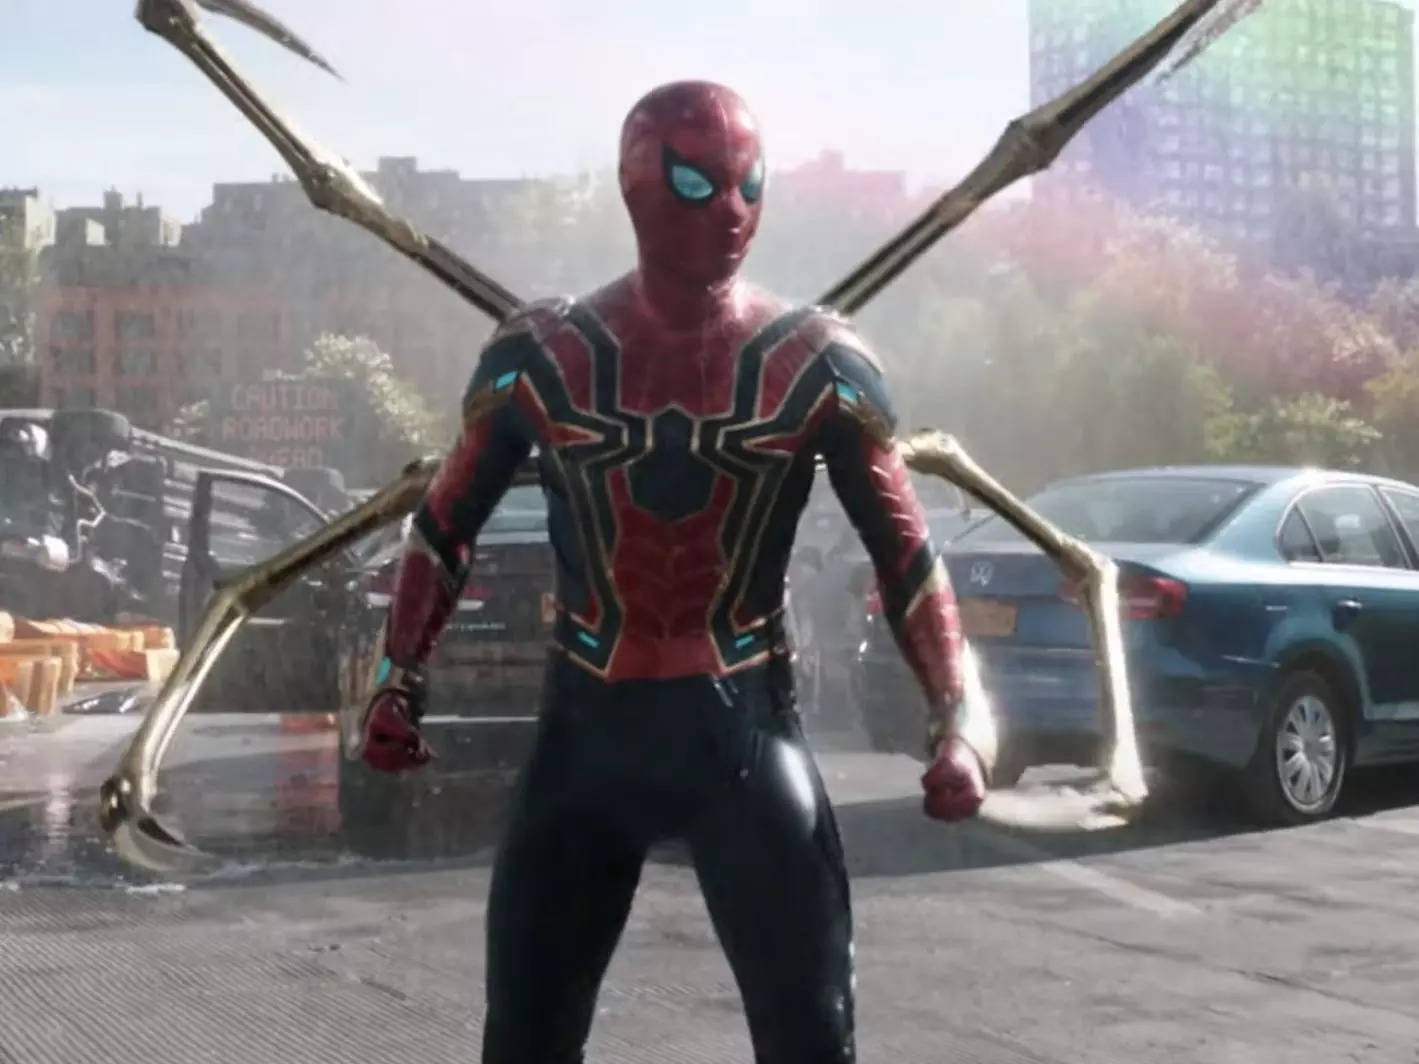 The 1st 'Spider-Man: No Way Home' trailer is finally here and it teases - Alquilar Spider Man No Way Home